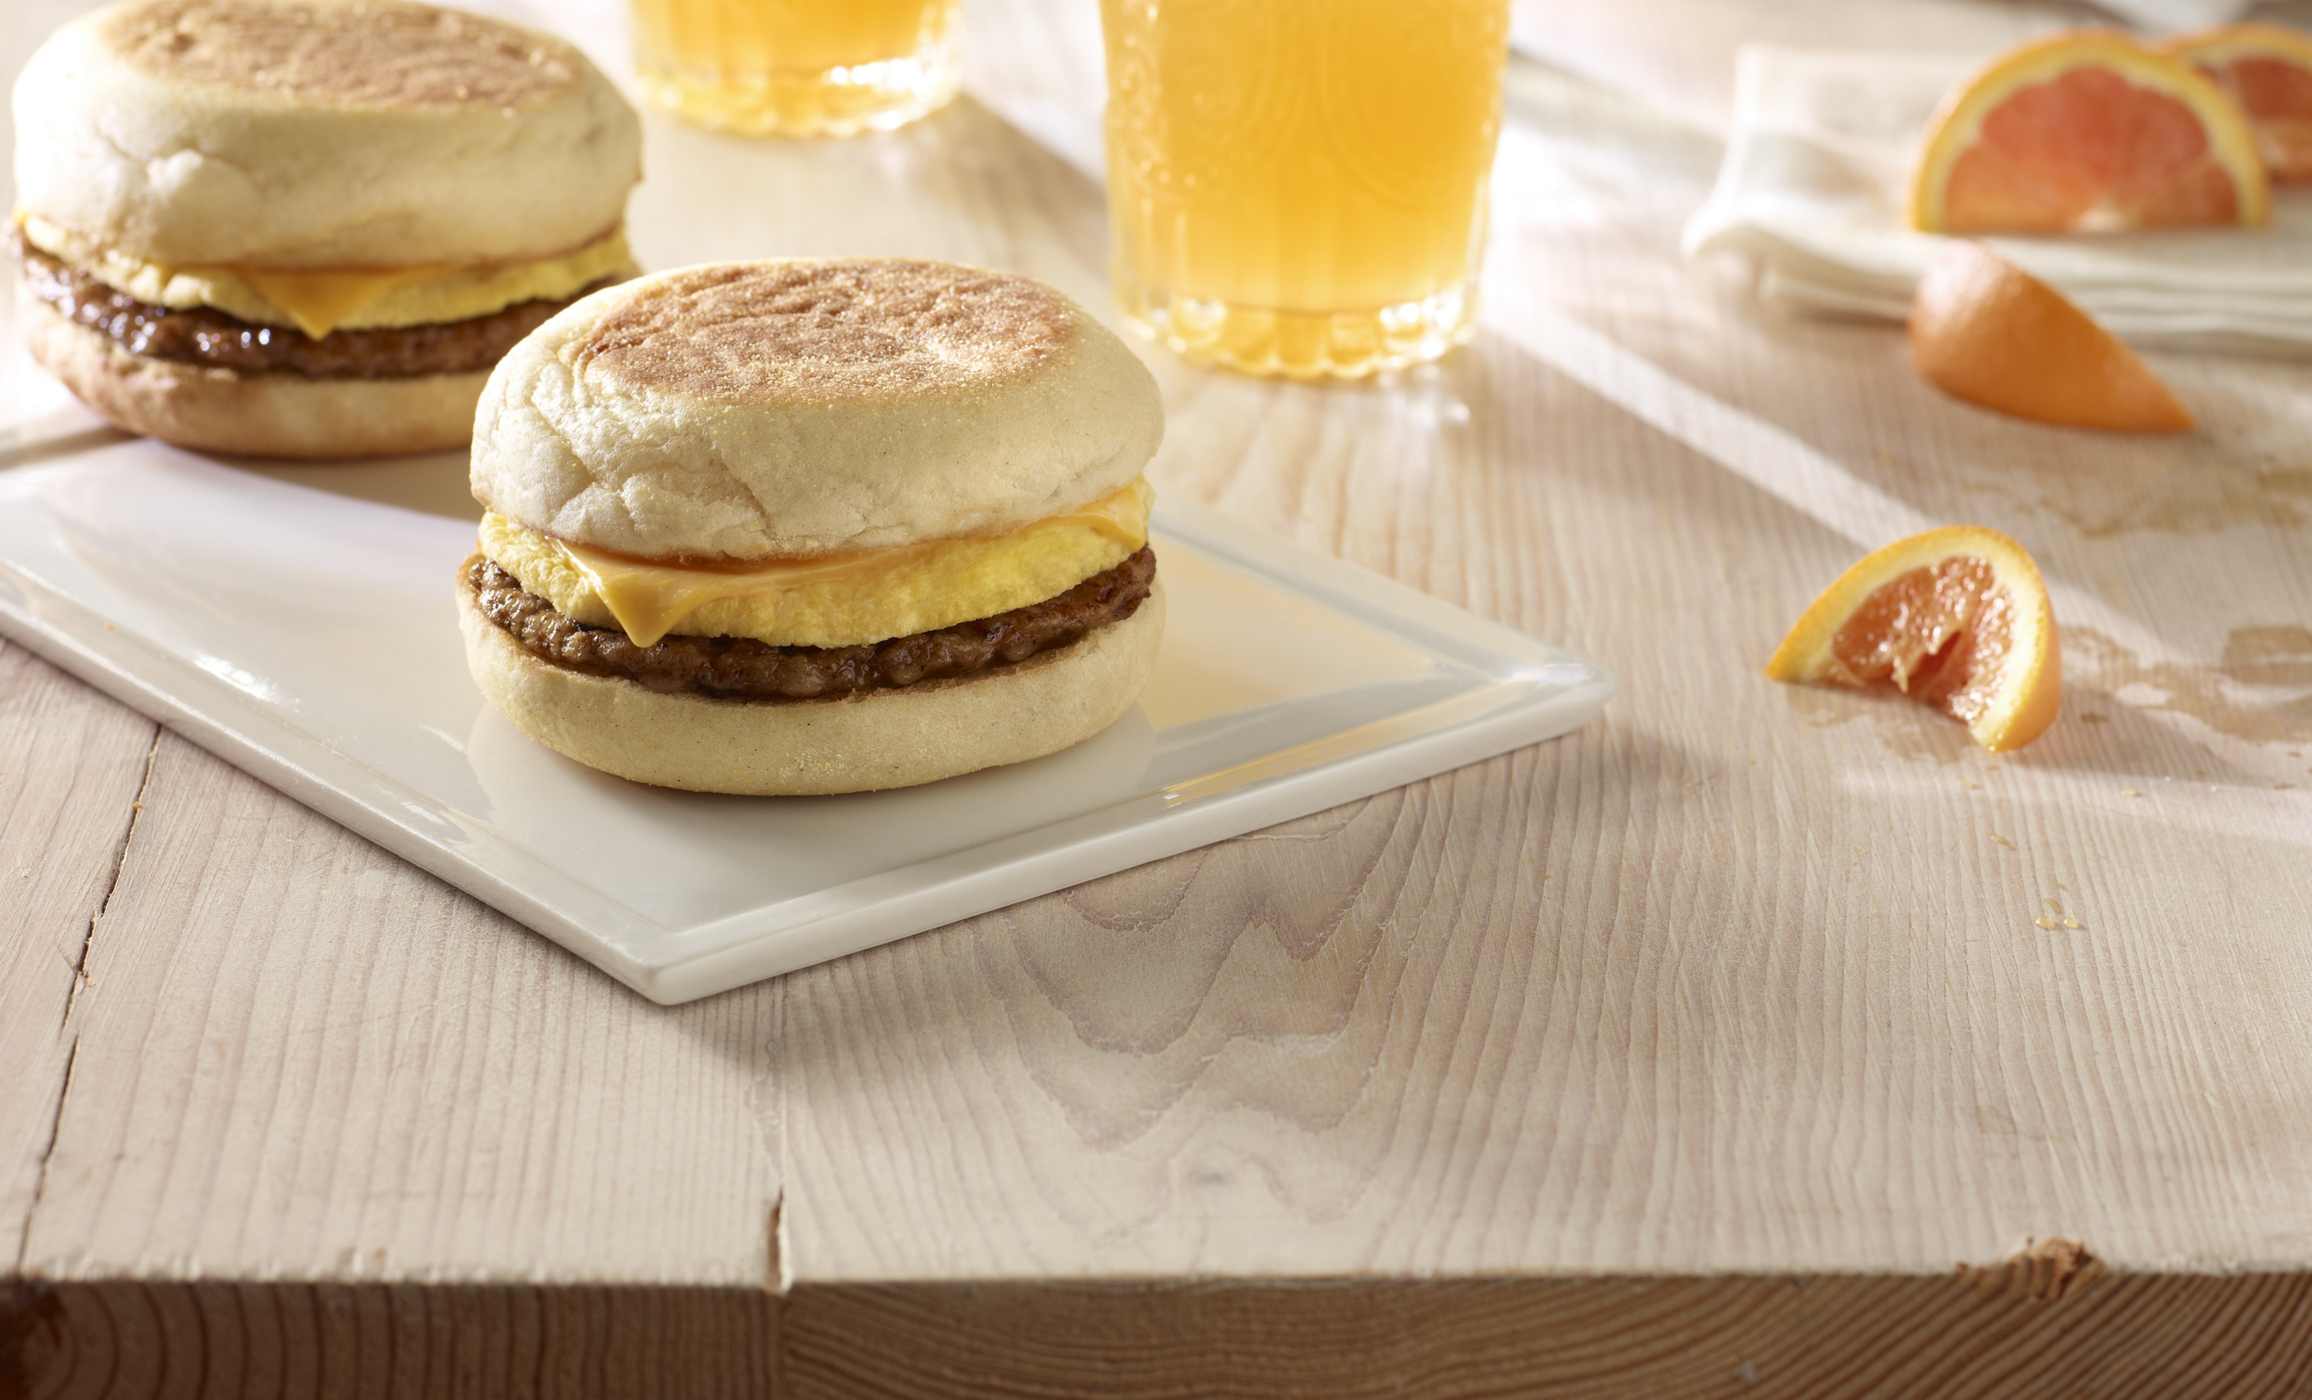 Jimmy Dean Sausage, Egg & Cheese English Muffin Sandwiches; image 5 of 5